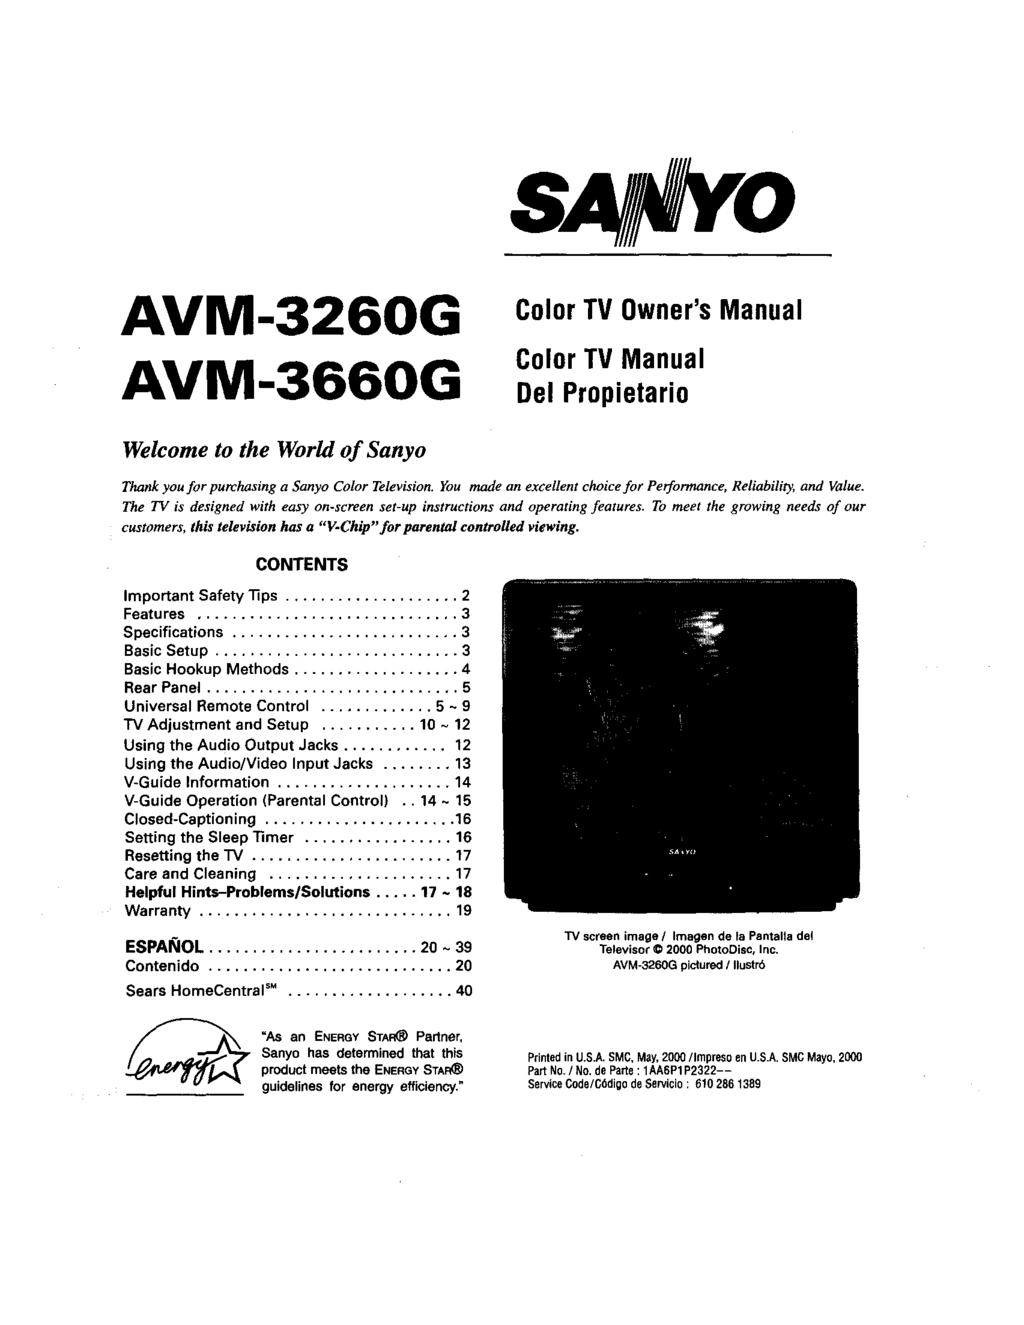 s lll O AVM-3260G AVM-3660G ColorTV Owner'sManual Color TV Manual Del Propetaro Welcome to the World of Sanyo Thank you for purchasng a Sanyo Color Televson.